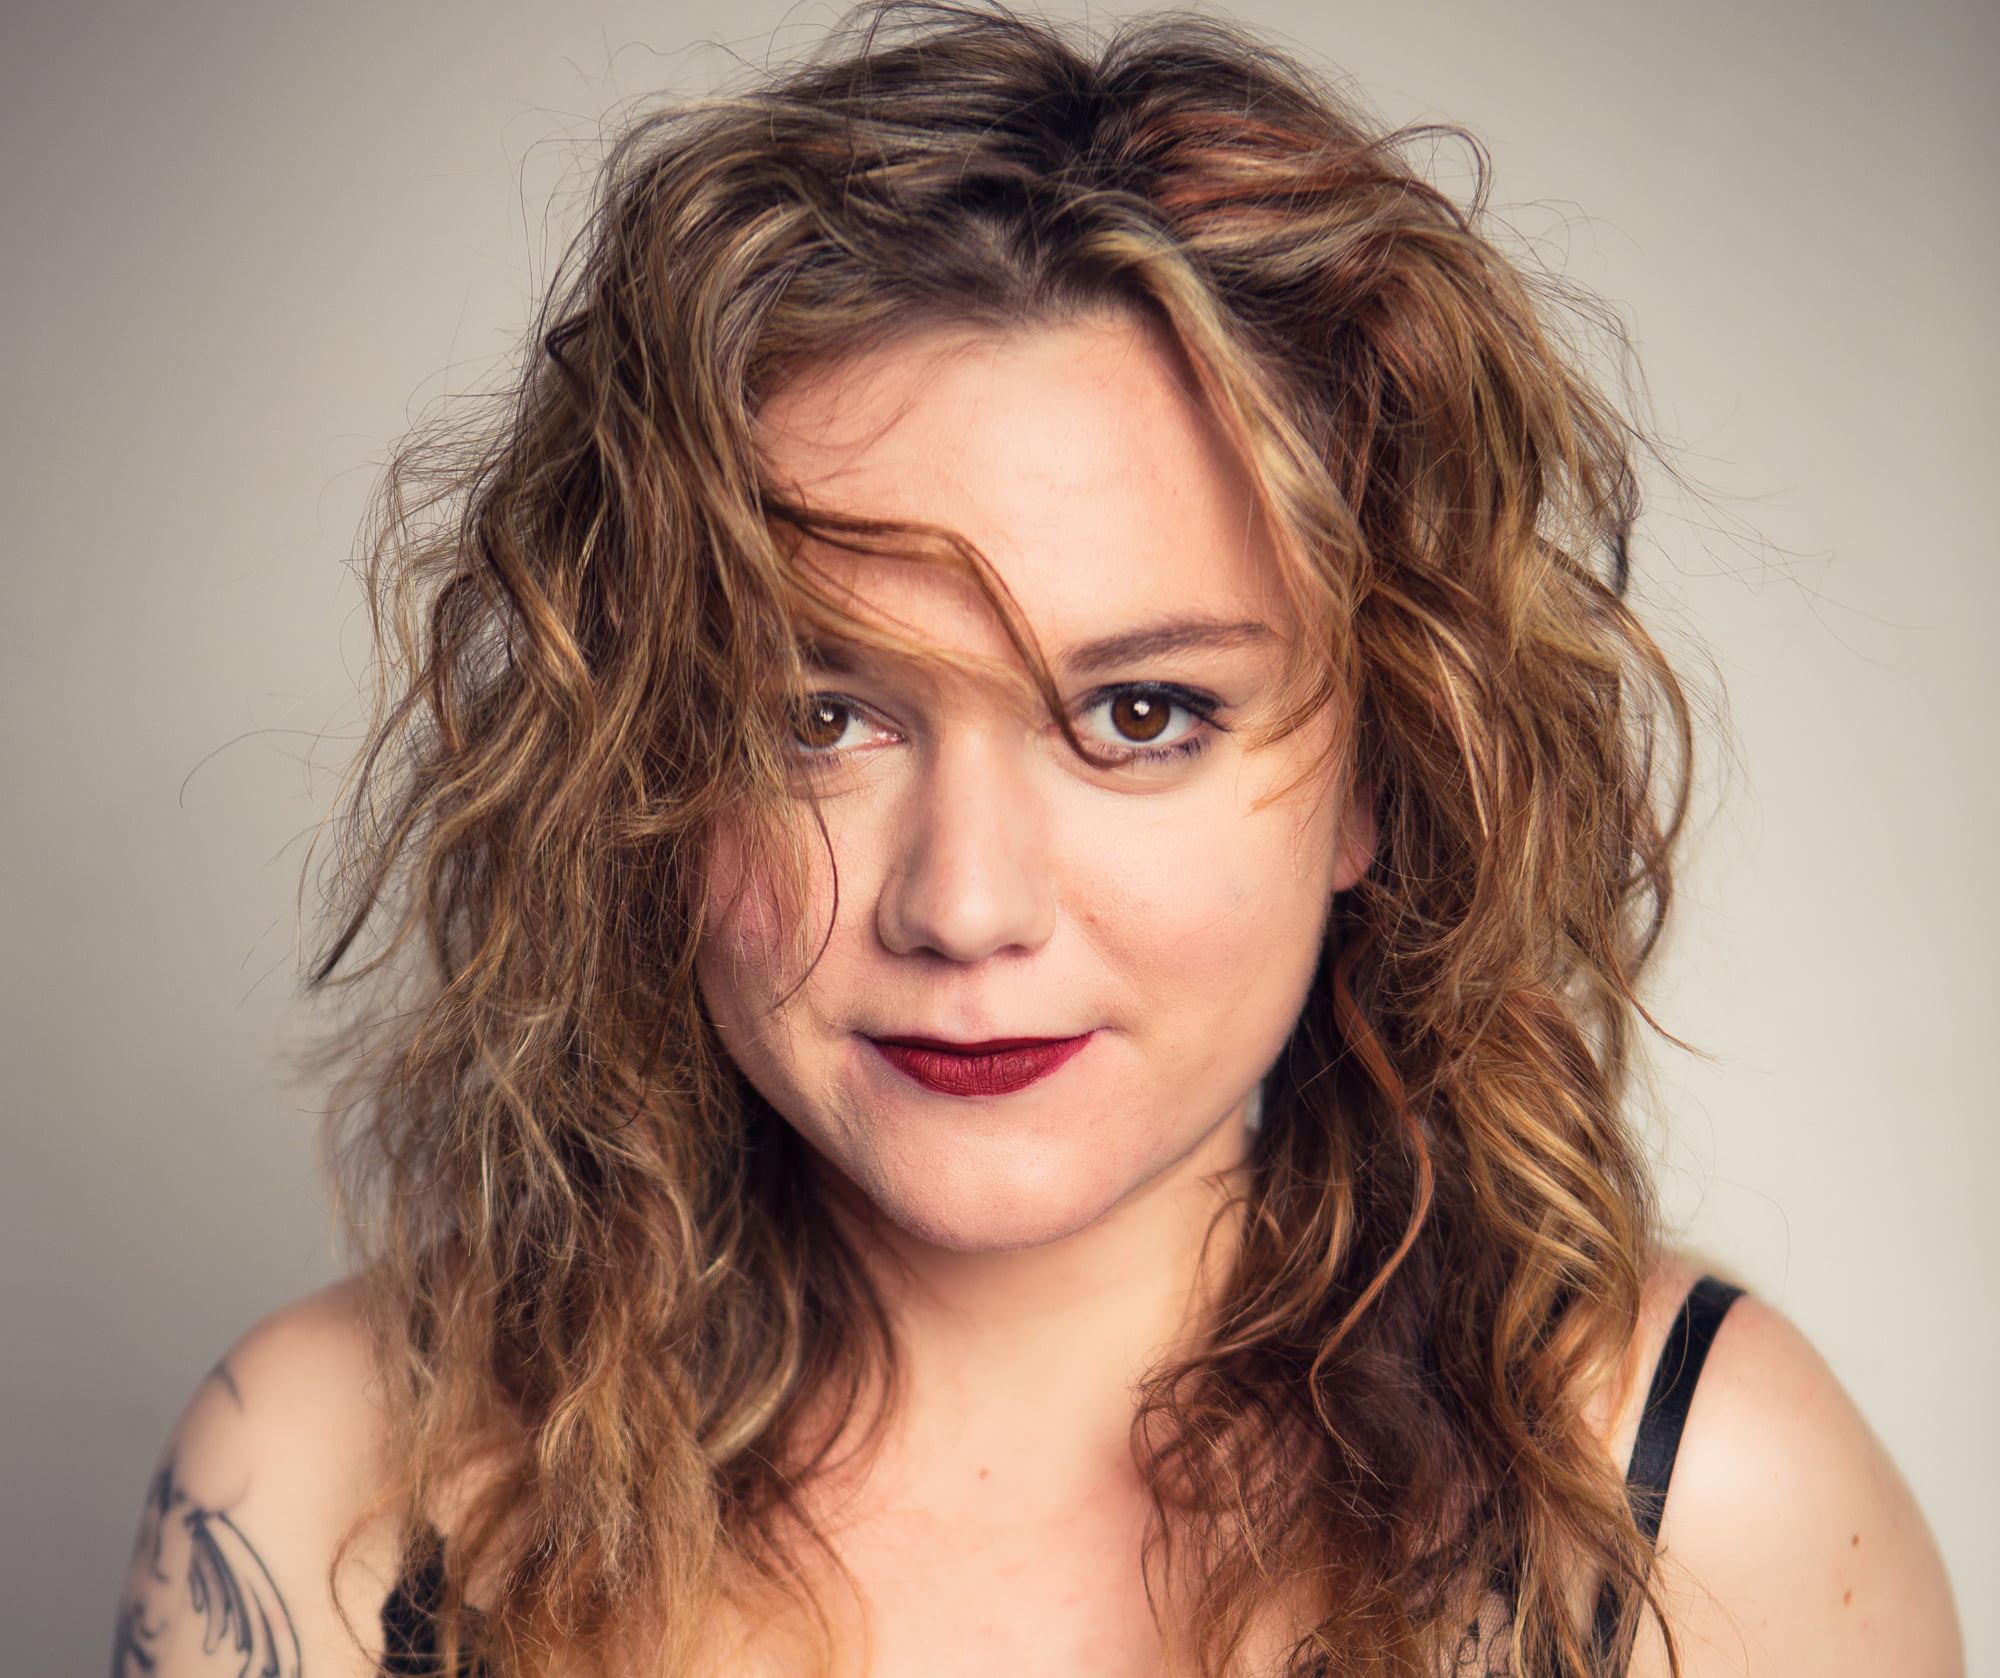 Death Wears a Wedding Ring: Lydia Loveless in Conversation with John Paul White